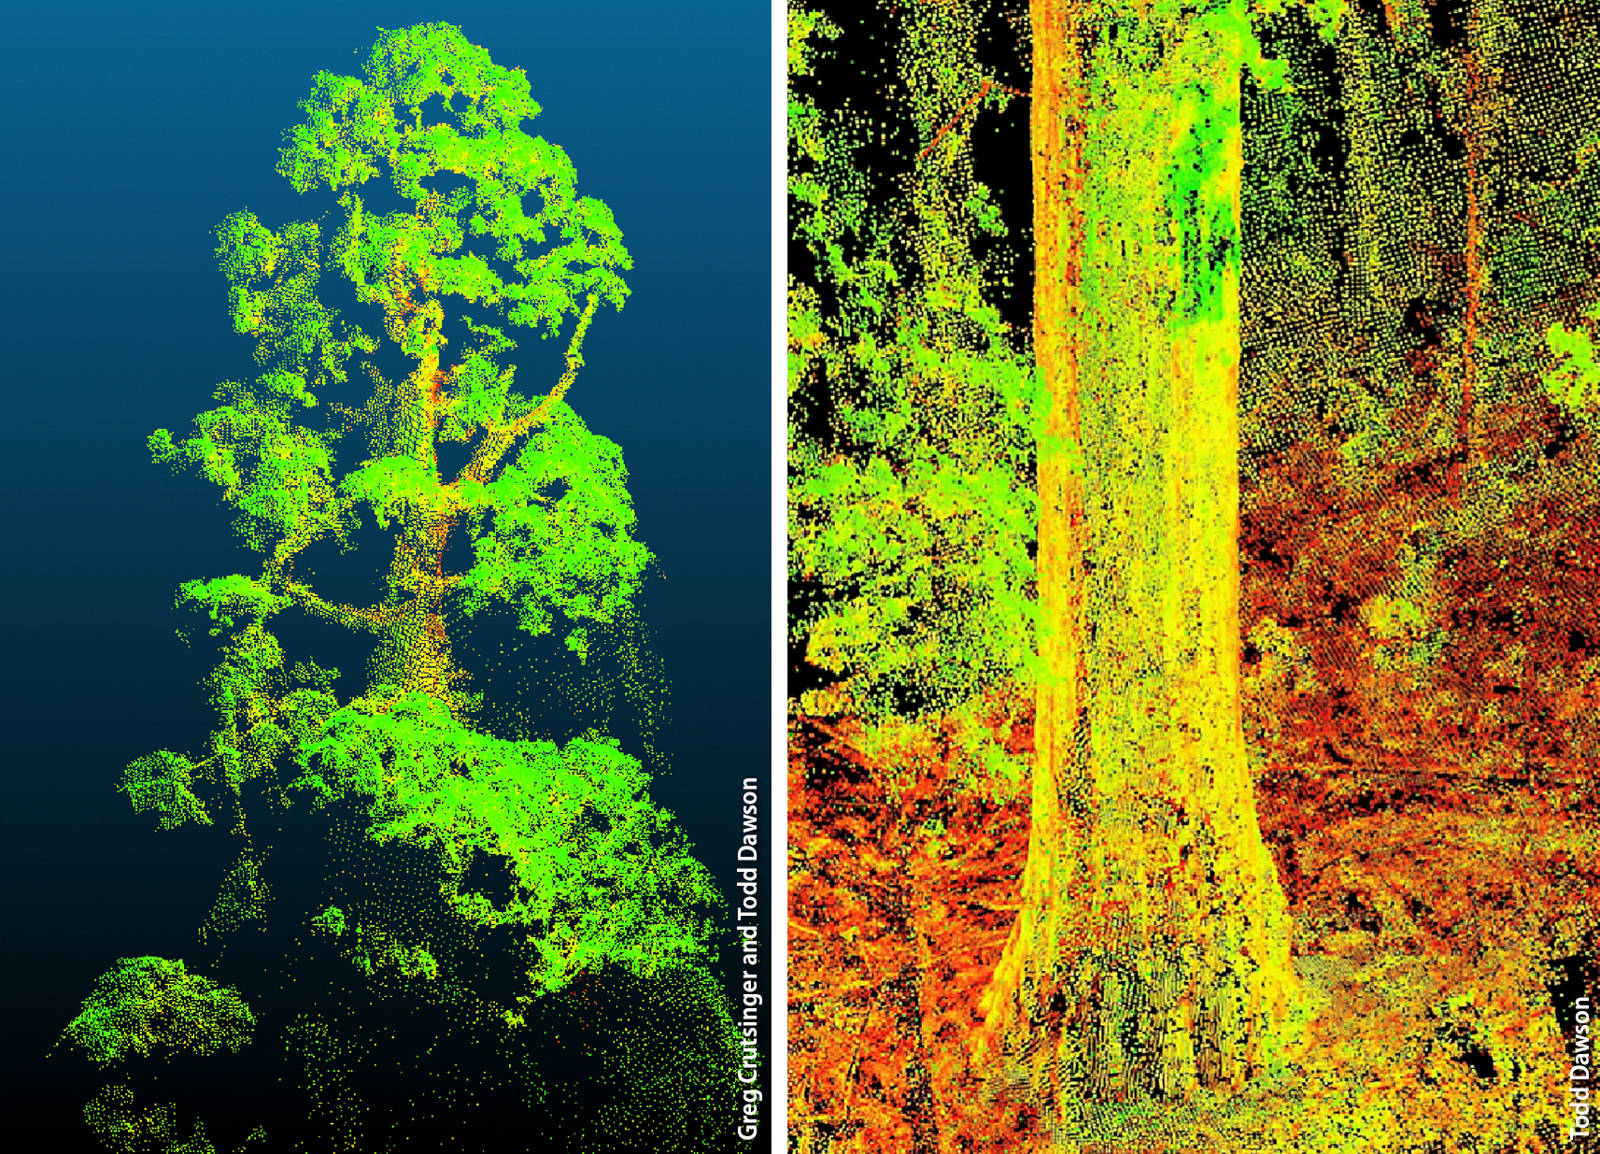 Precise 3-D maps of tress, like these of giant sequoias generated from multispectral images using Parrot Inc.'s Pix4D software, can yield information on water and carbon dioxide update, forest microclimates and forest carbon stocks.